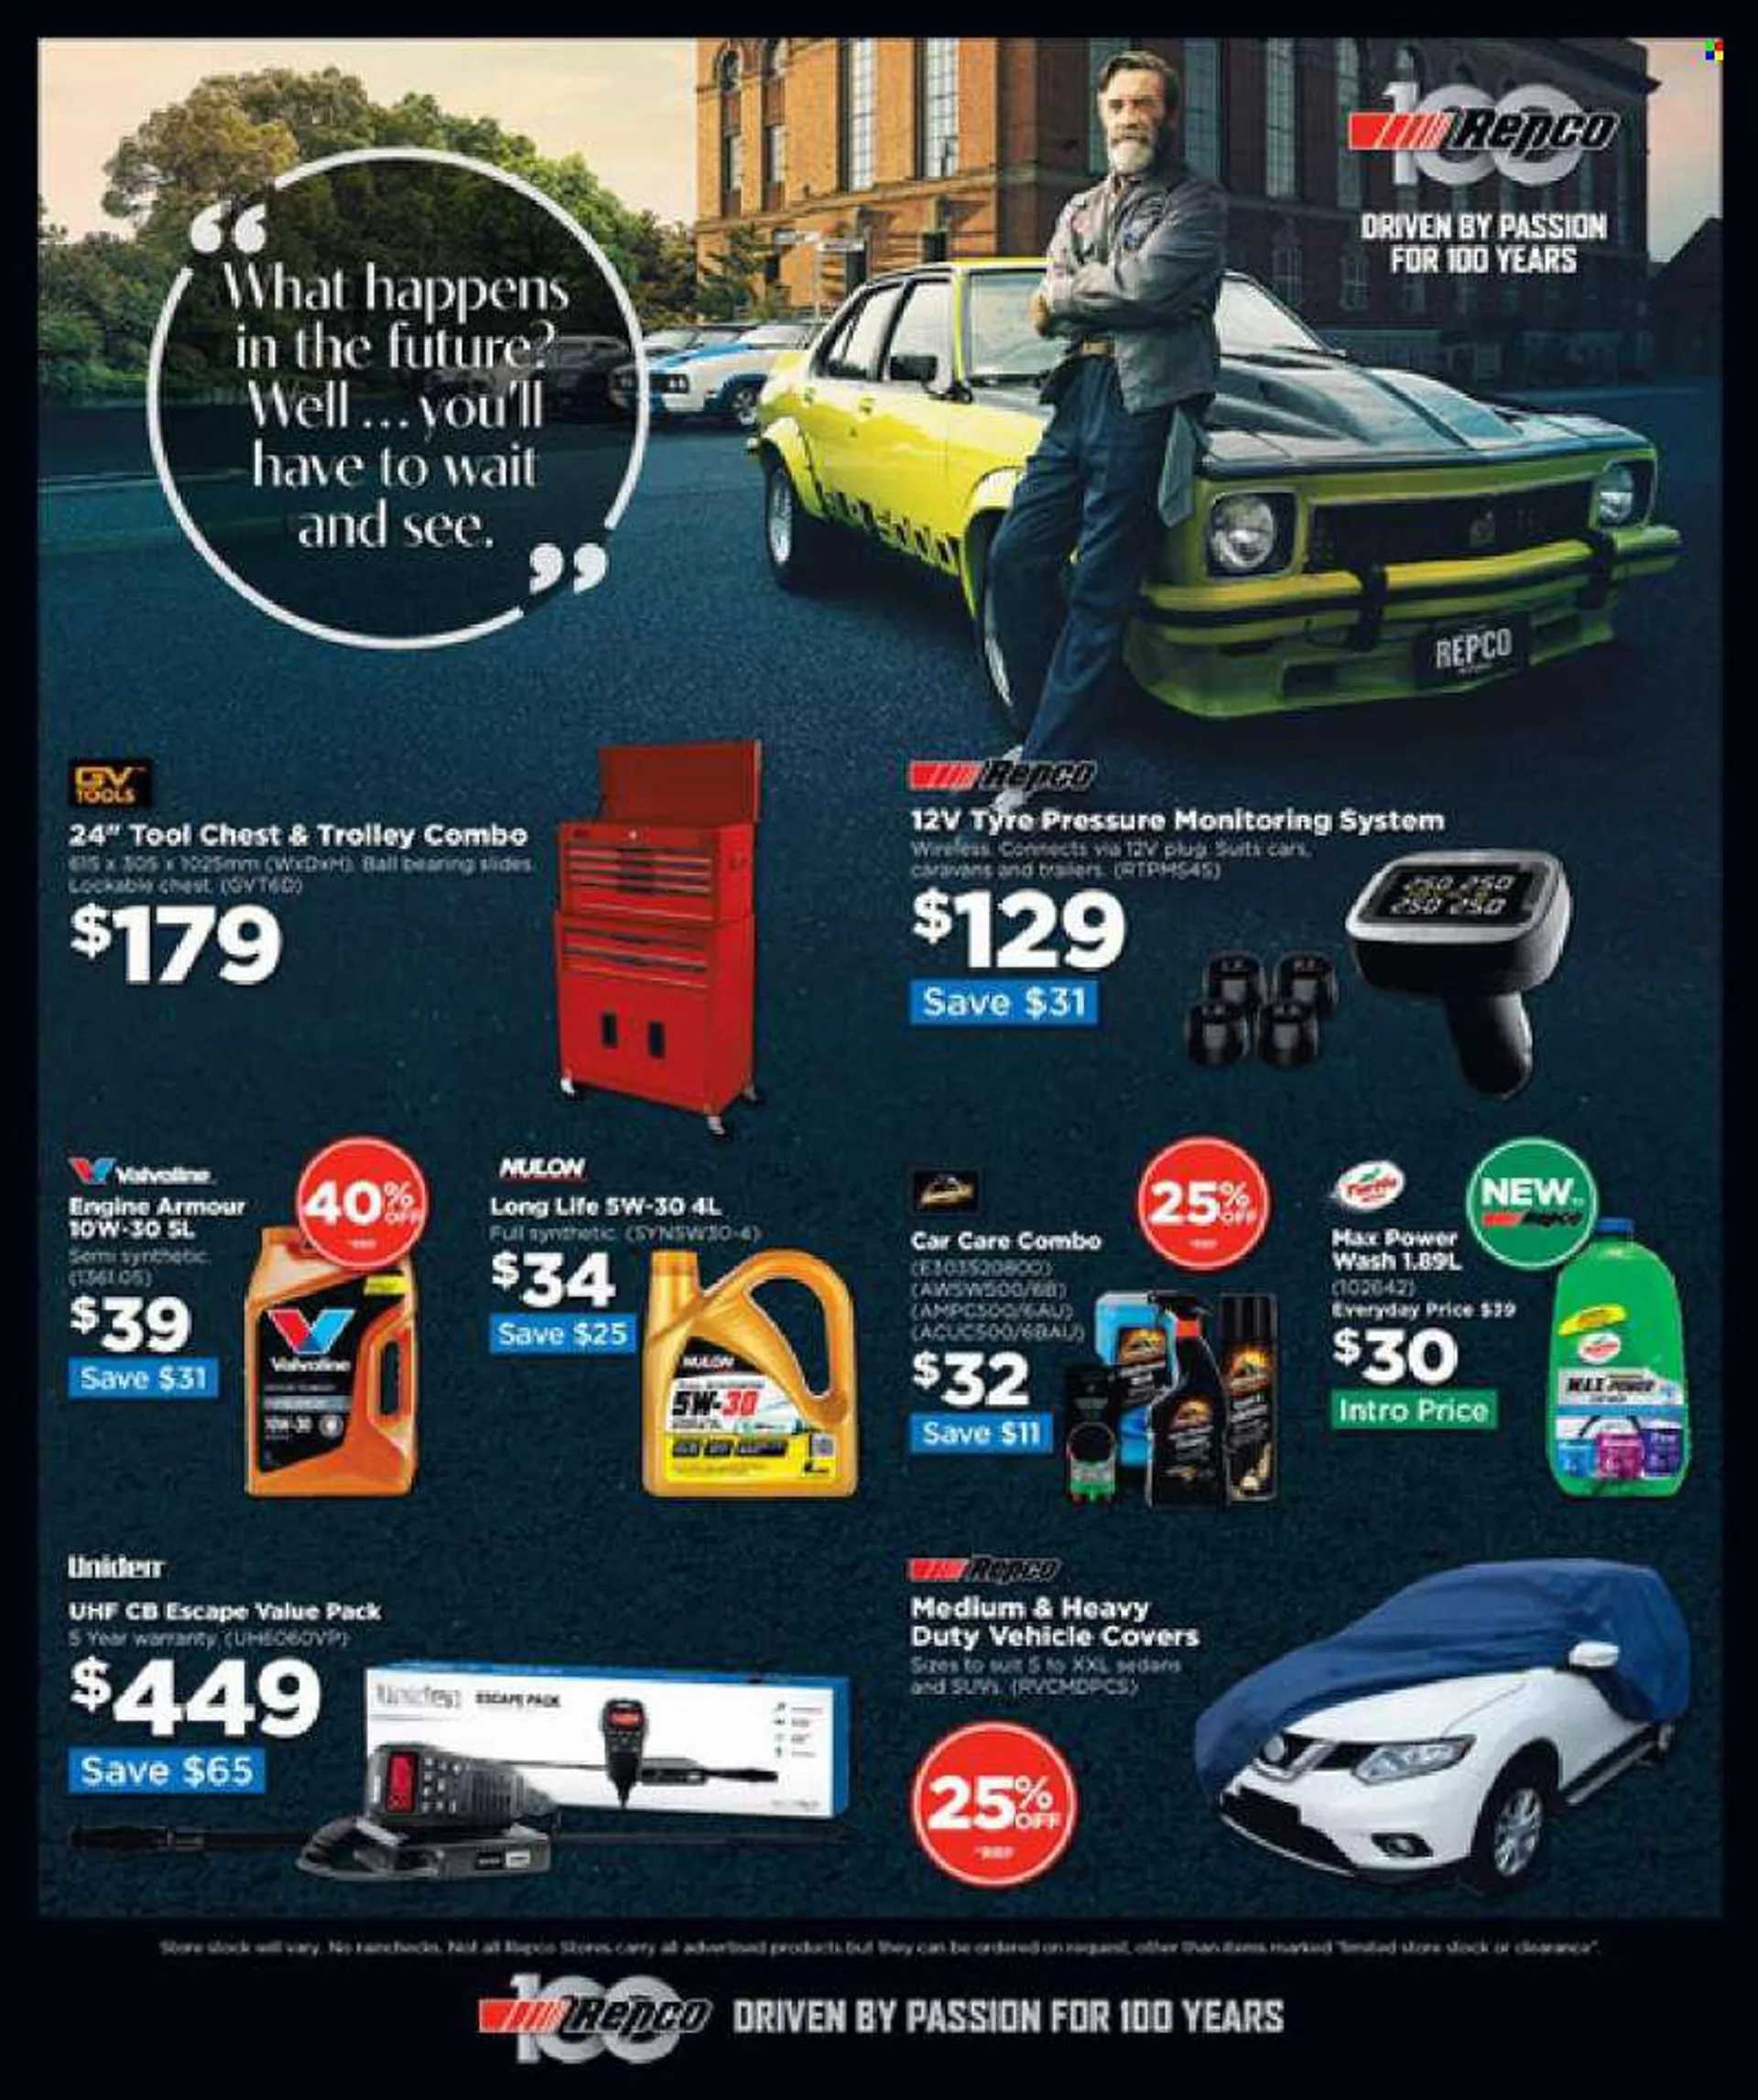 Repco mailer - 20.04.2022 - 03.05.2022. - 20 April 3 May 2022 - Page 16